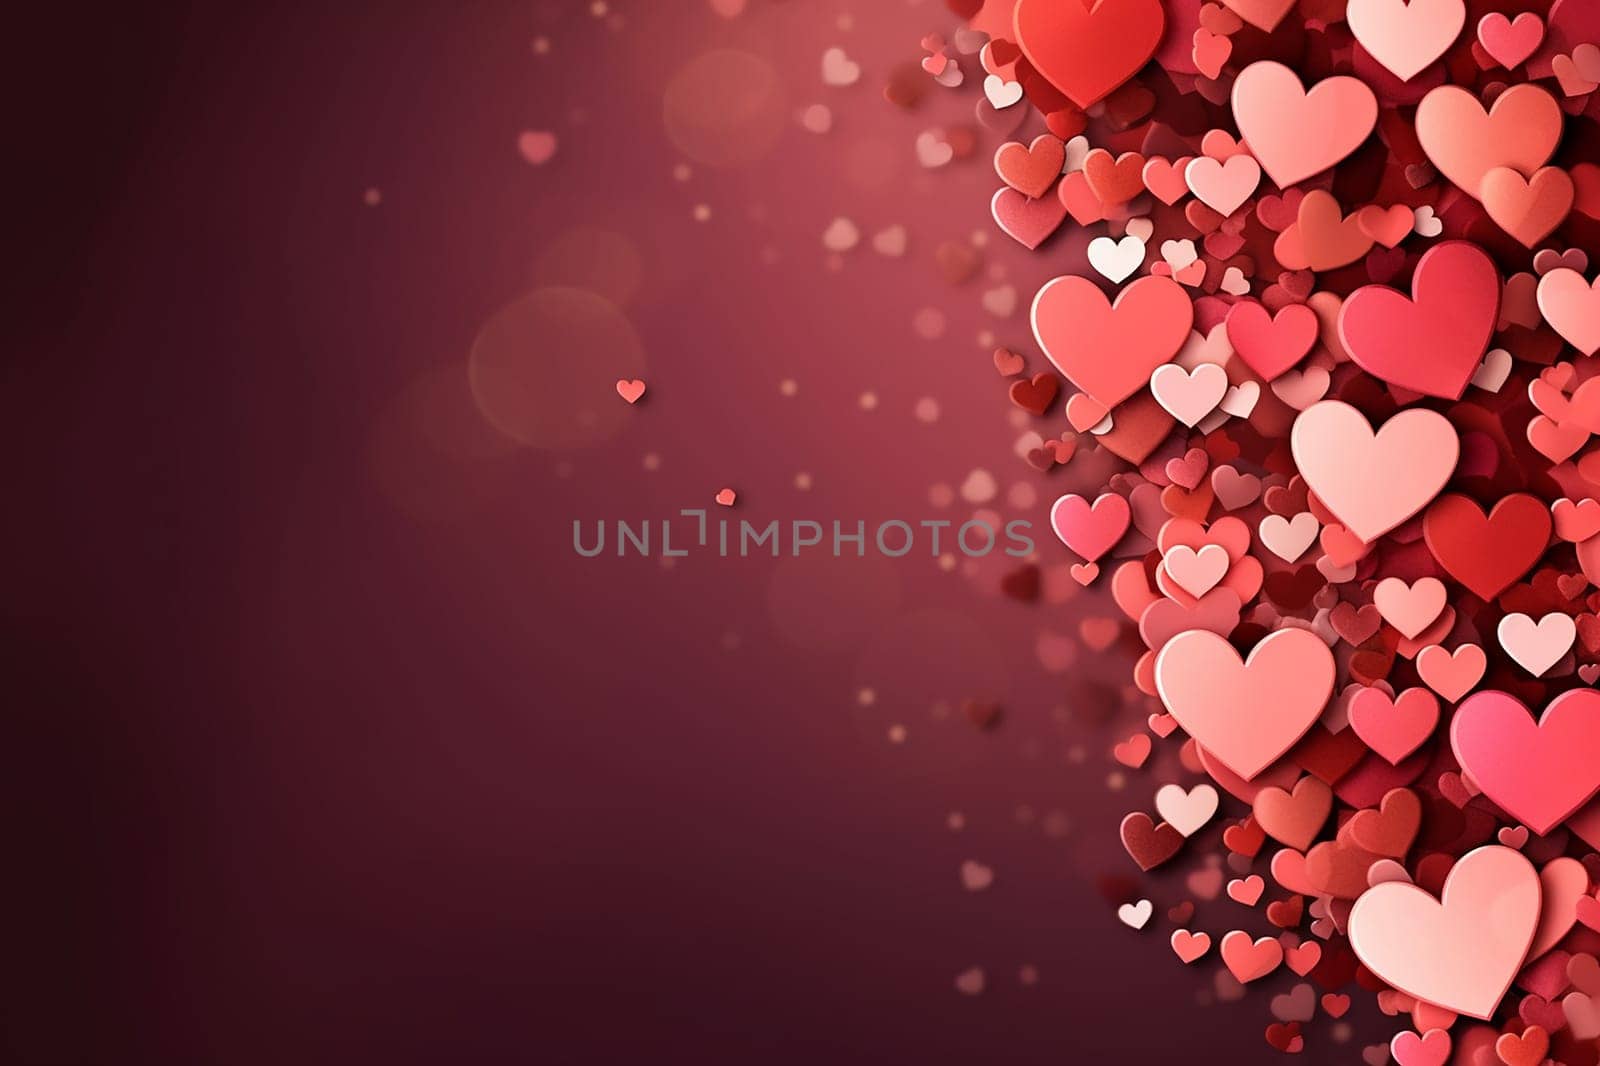 Assortment of heart shapes on a red background, depicting love and romance.